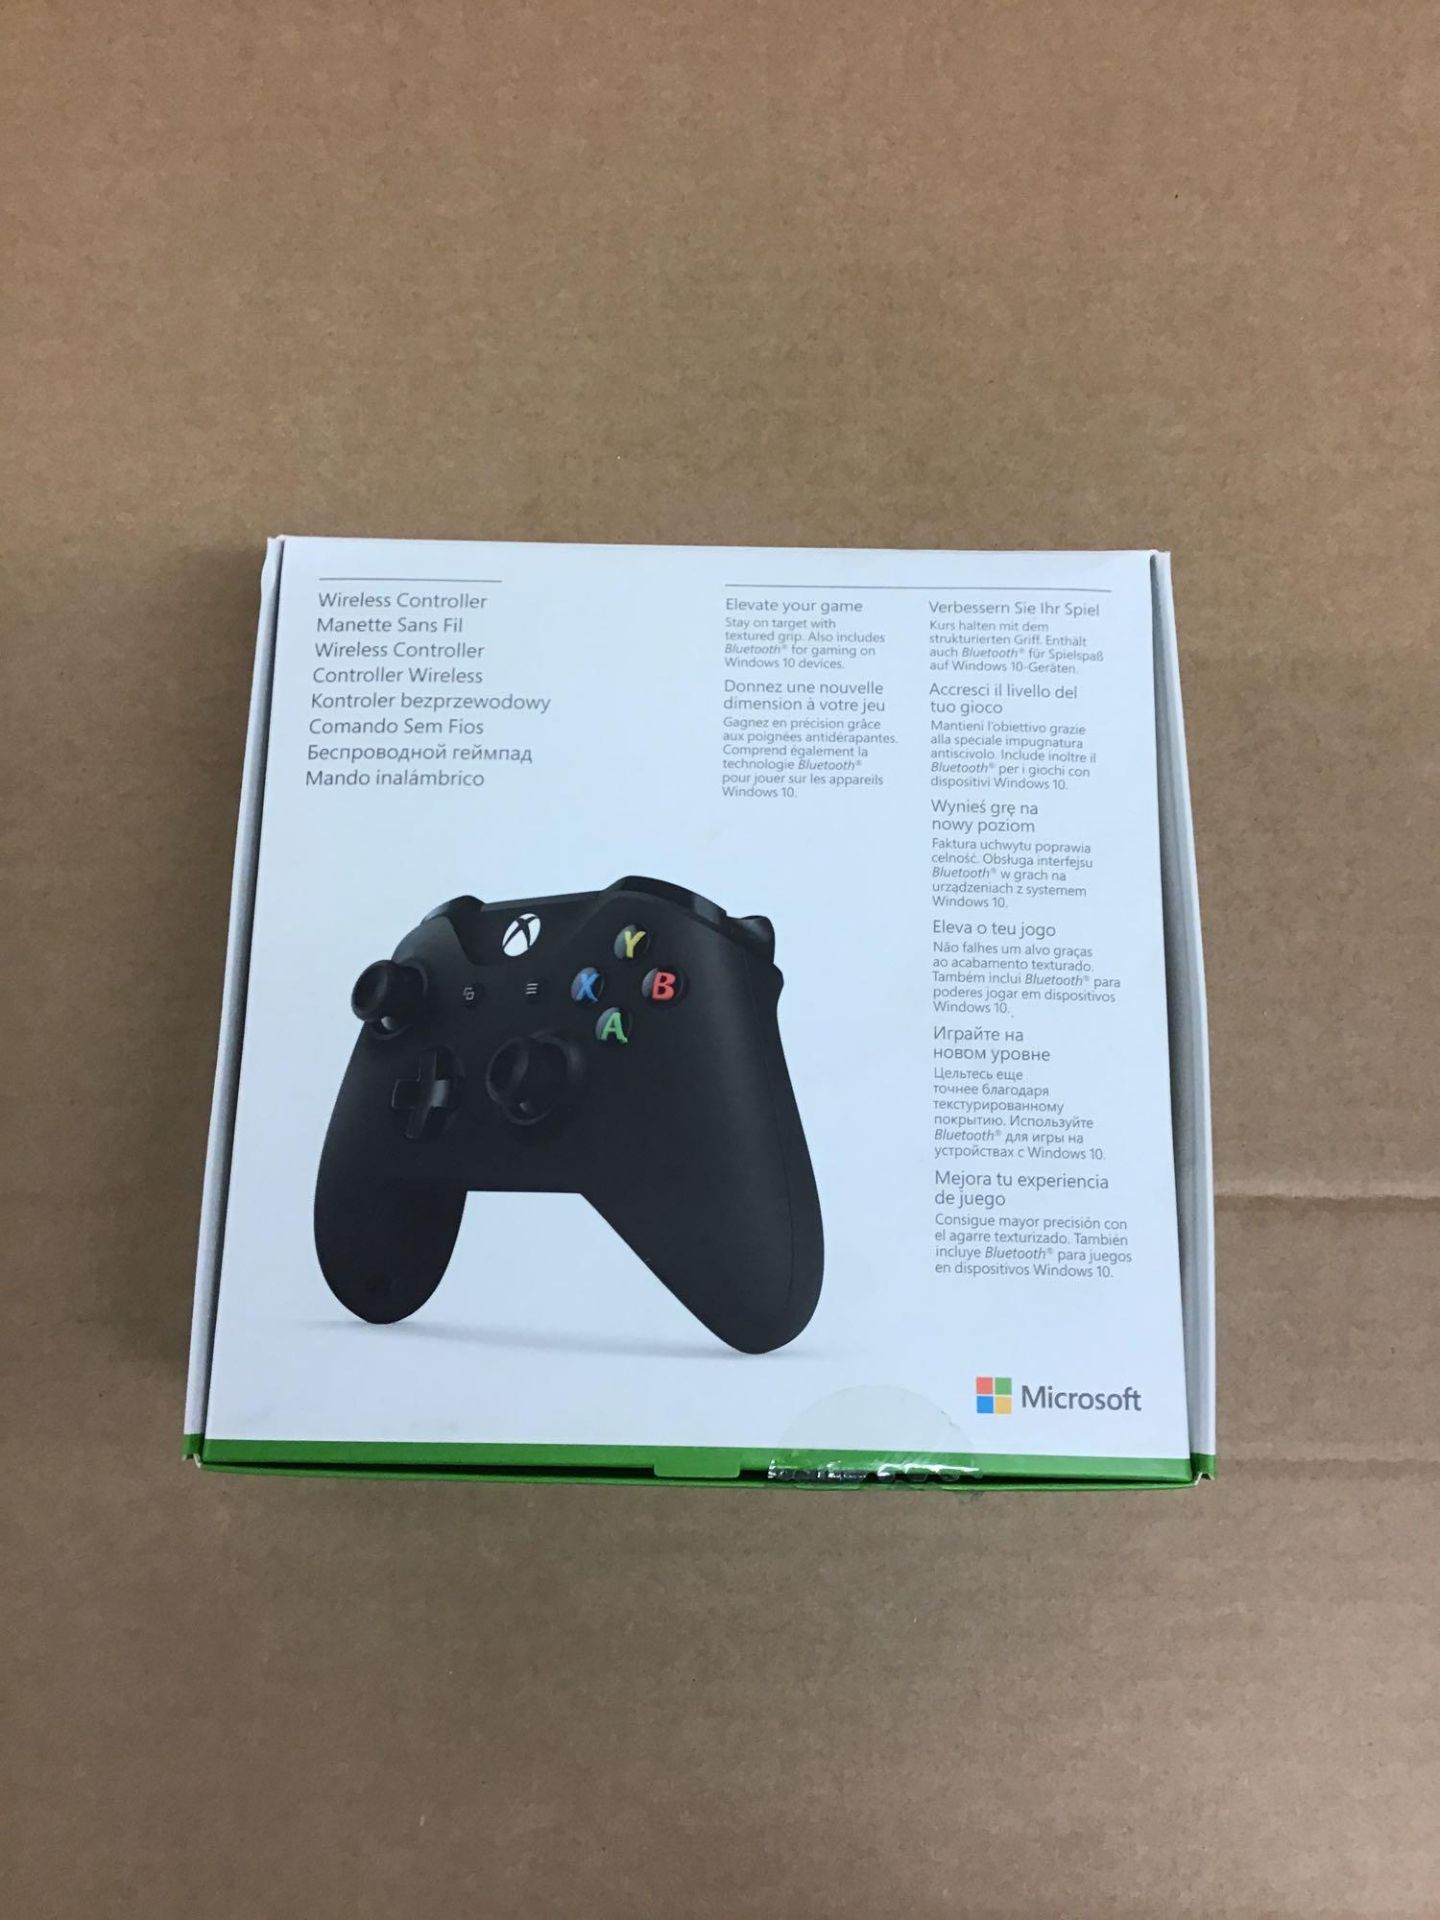 Official Xbox One Wireless Controller 3.5mm - Black 619/9582 £49.99 RRP - Image 2 of 5